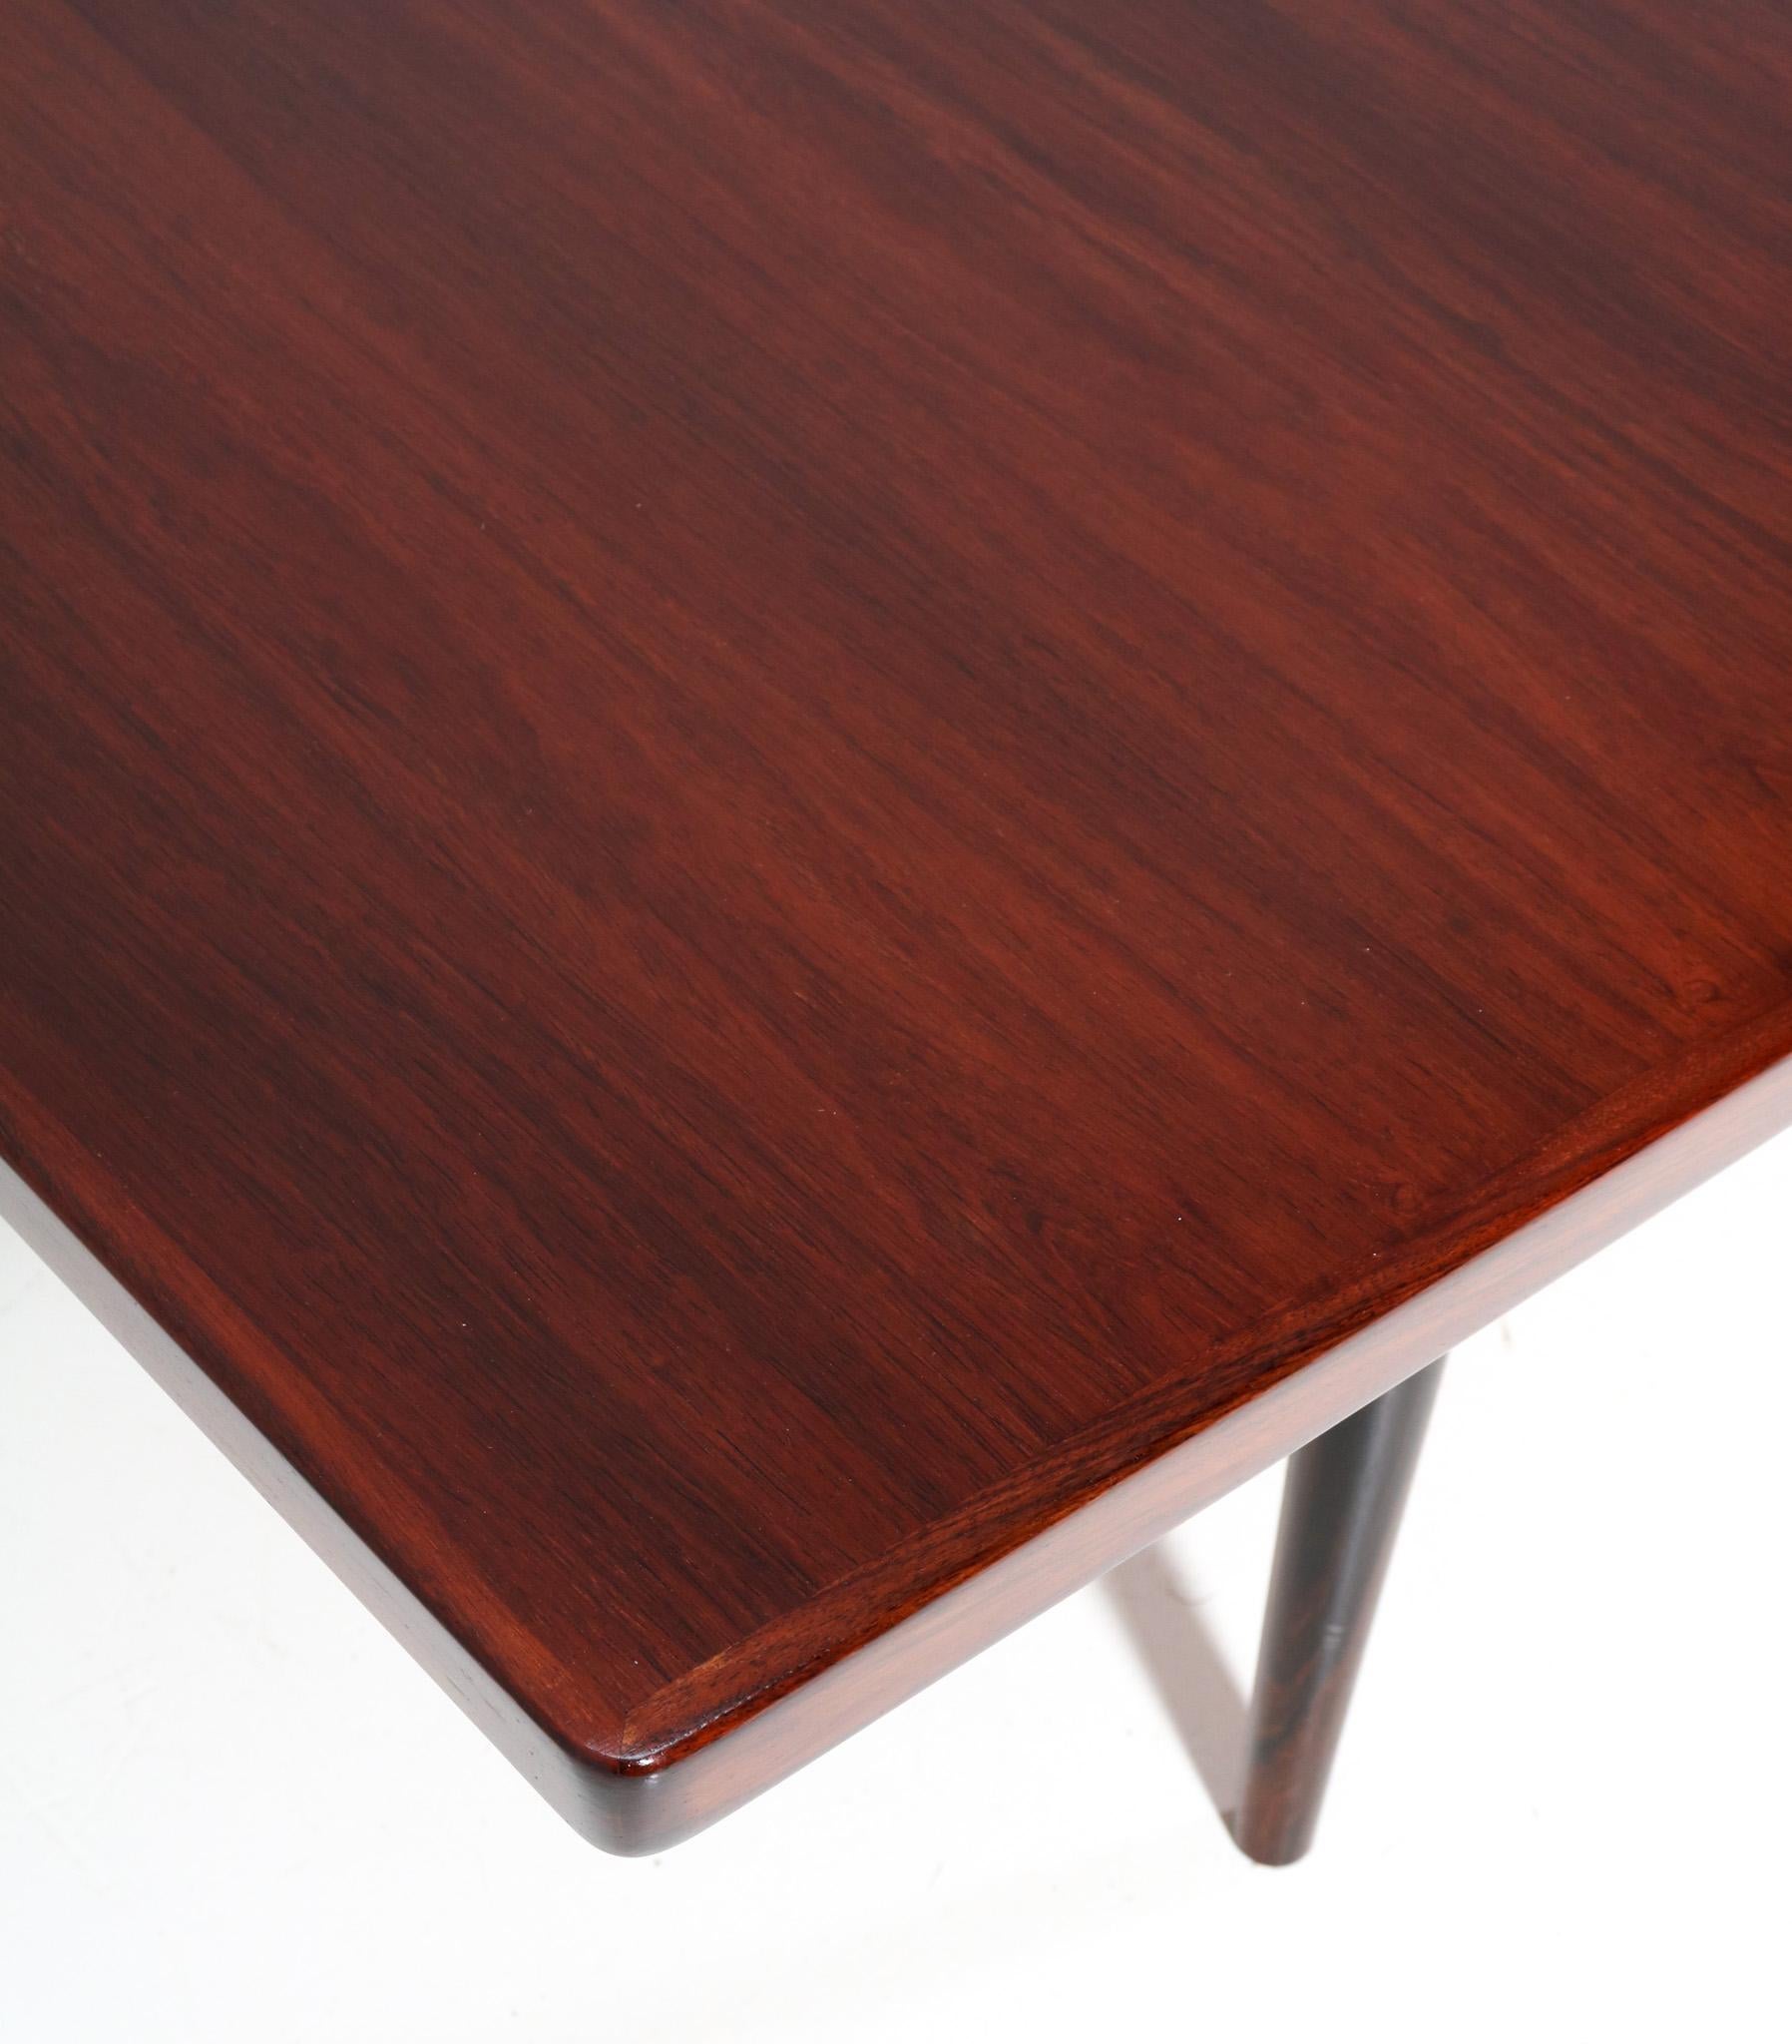 XL Mid-Century Modern Rosewood Conference Table by Arne Vodder for Sibast For Sale 4